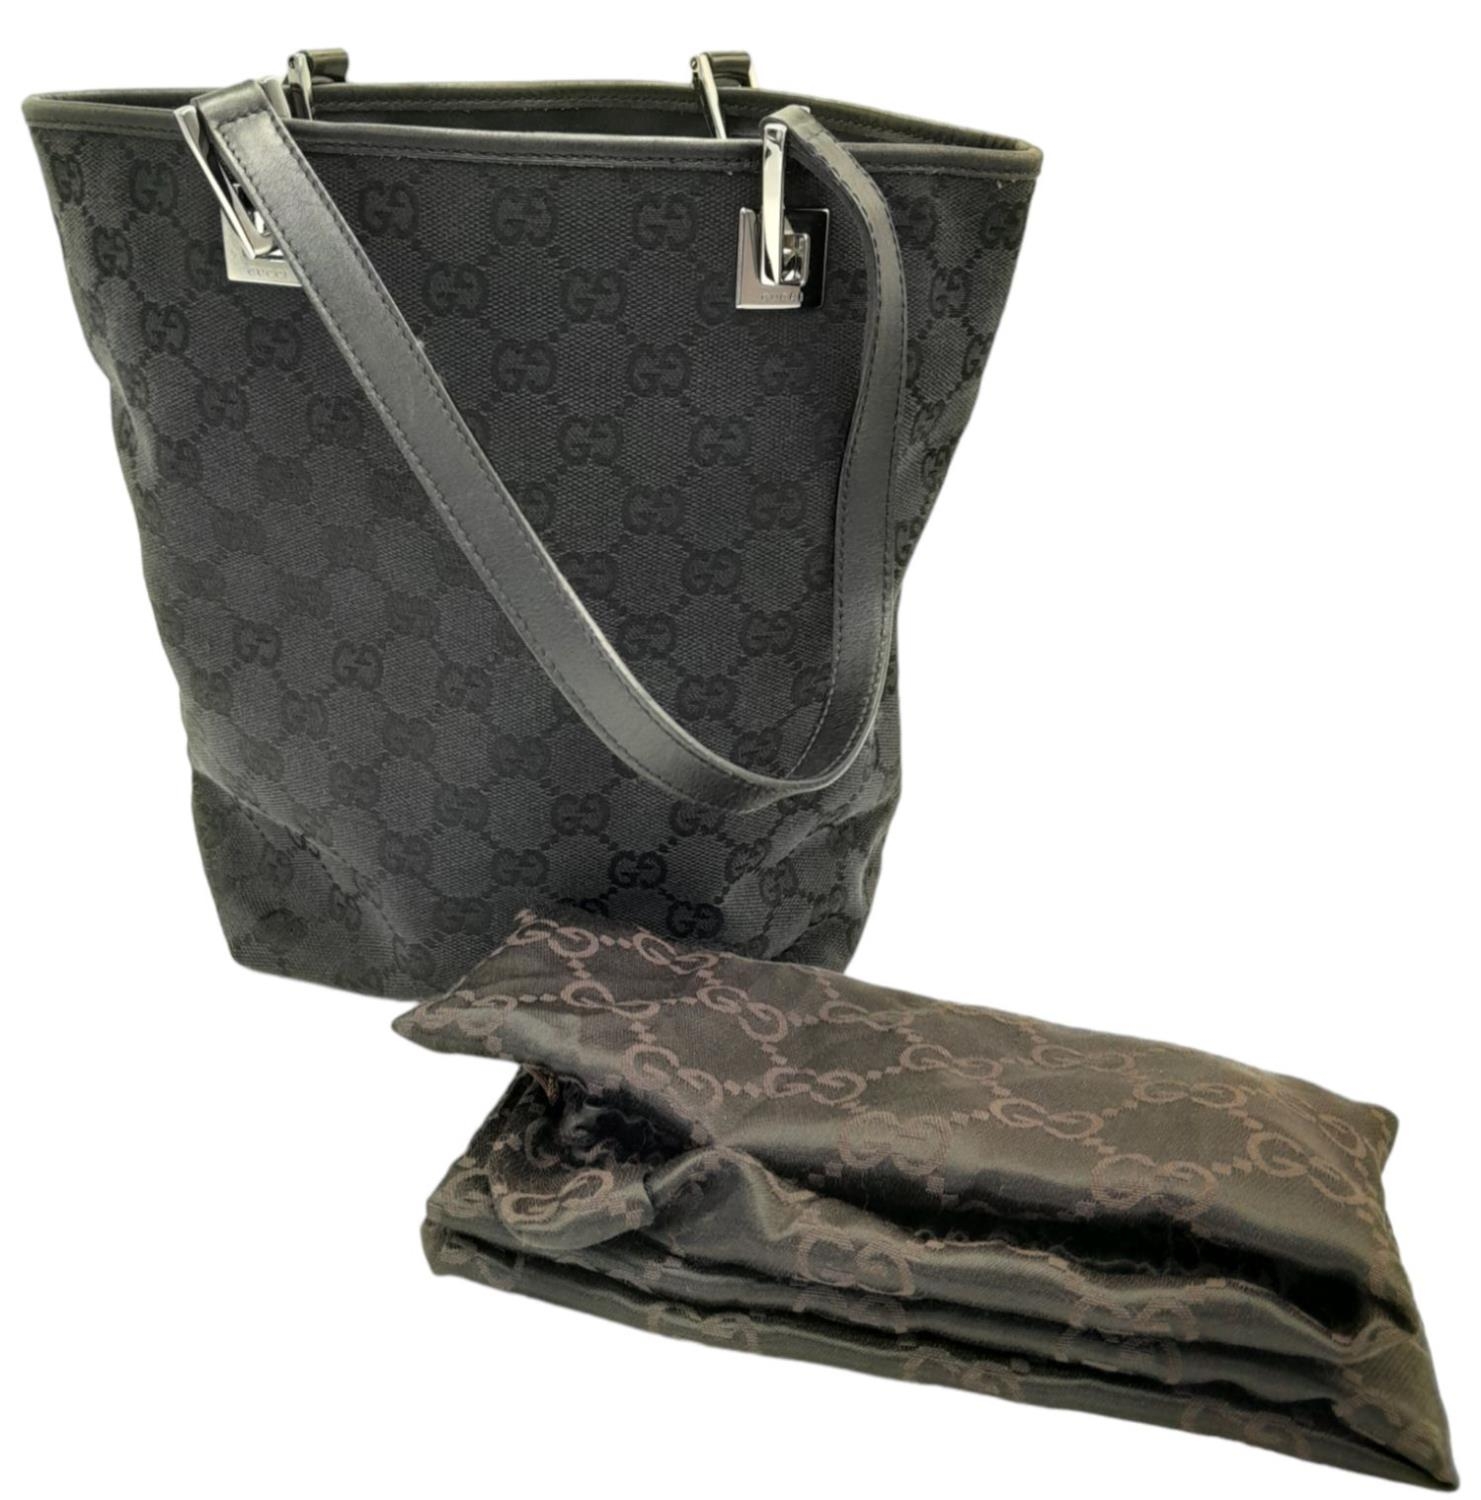 A Gucci Black Monogram Tote Bag. Canvas exterior with leather trim, two leather straps and silver- - Image 3 of 8